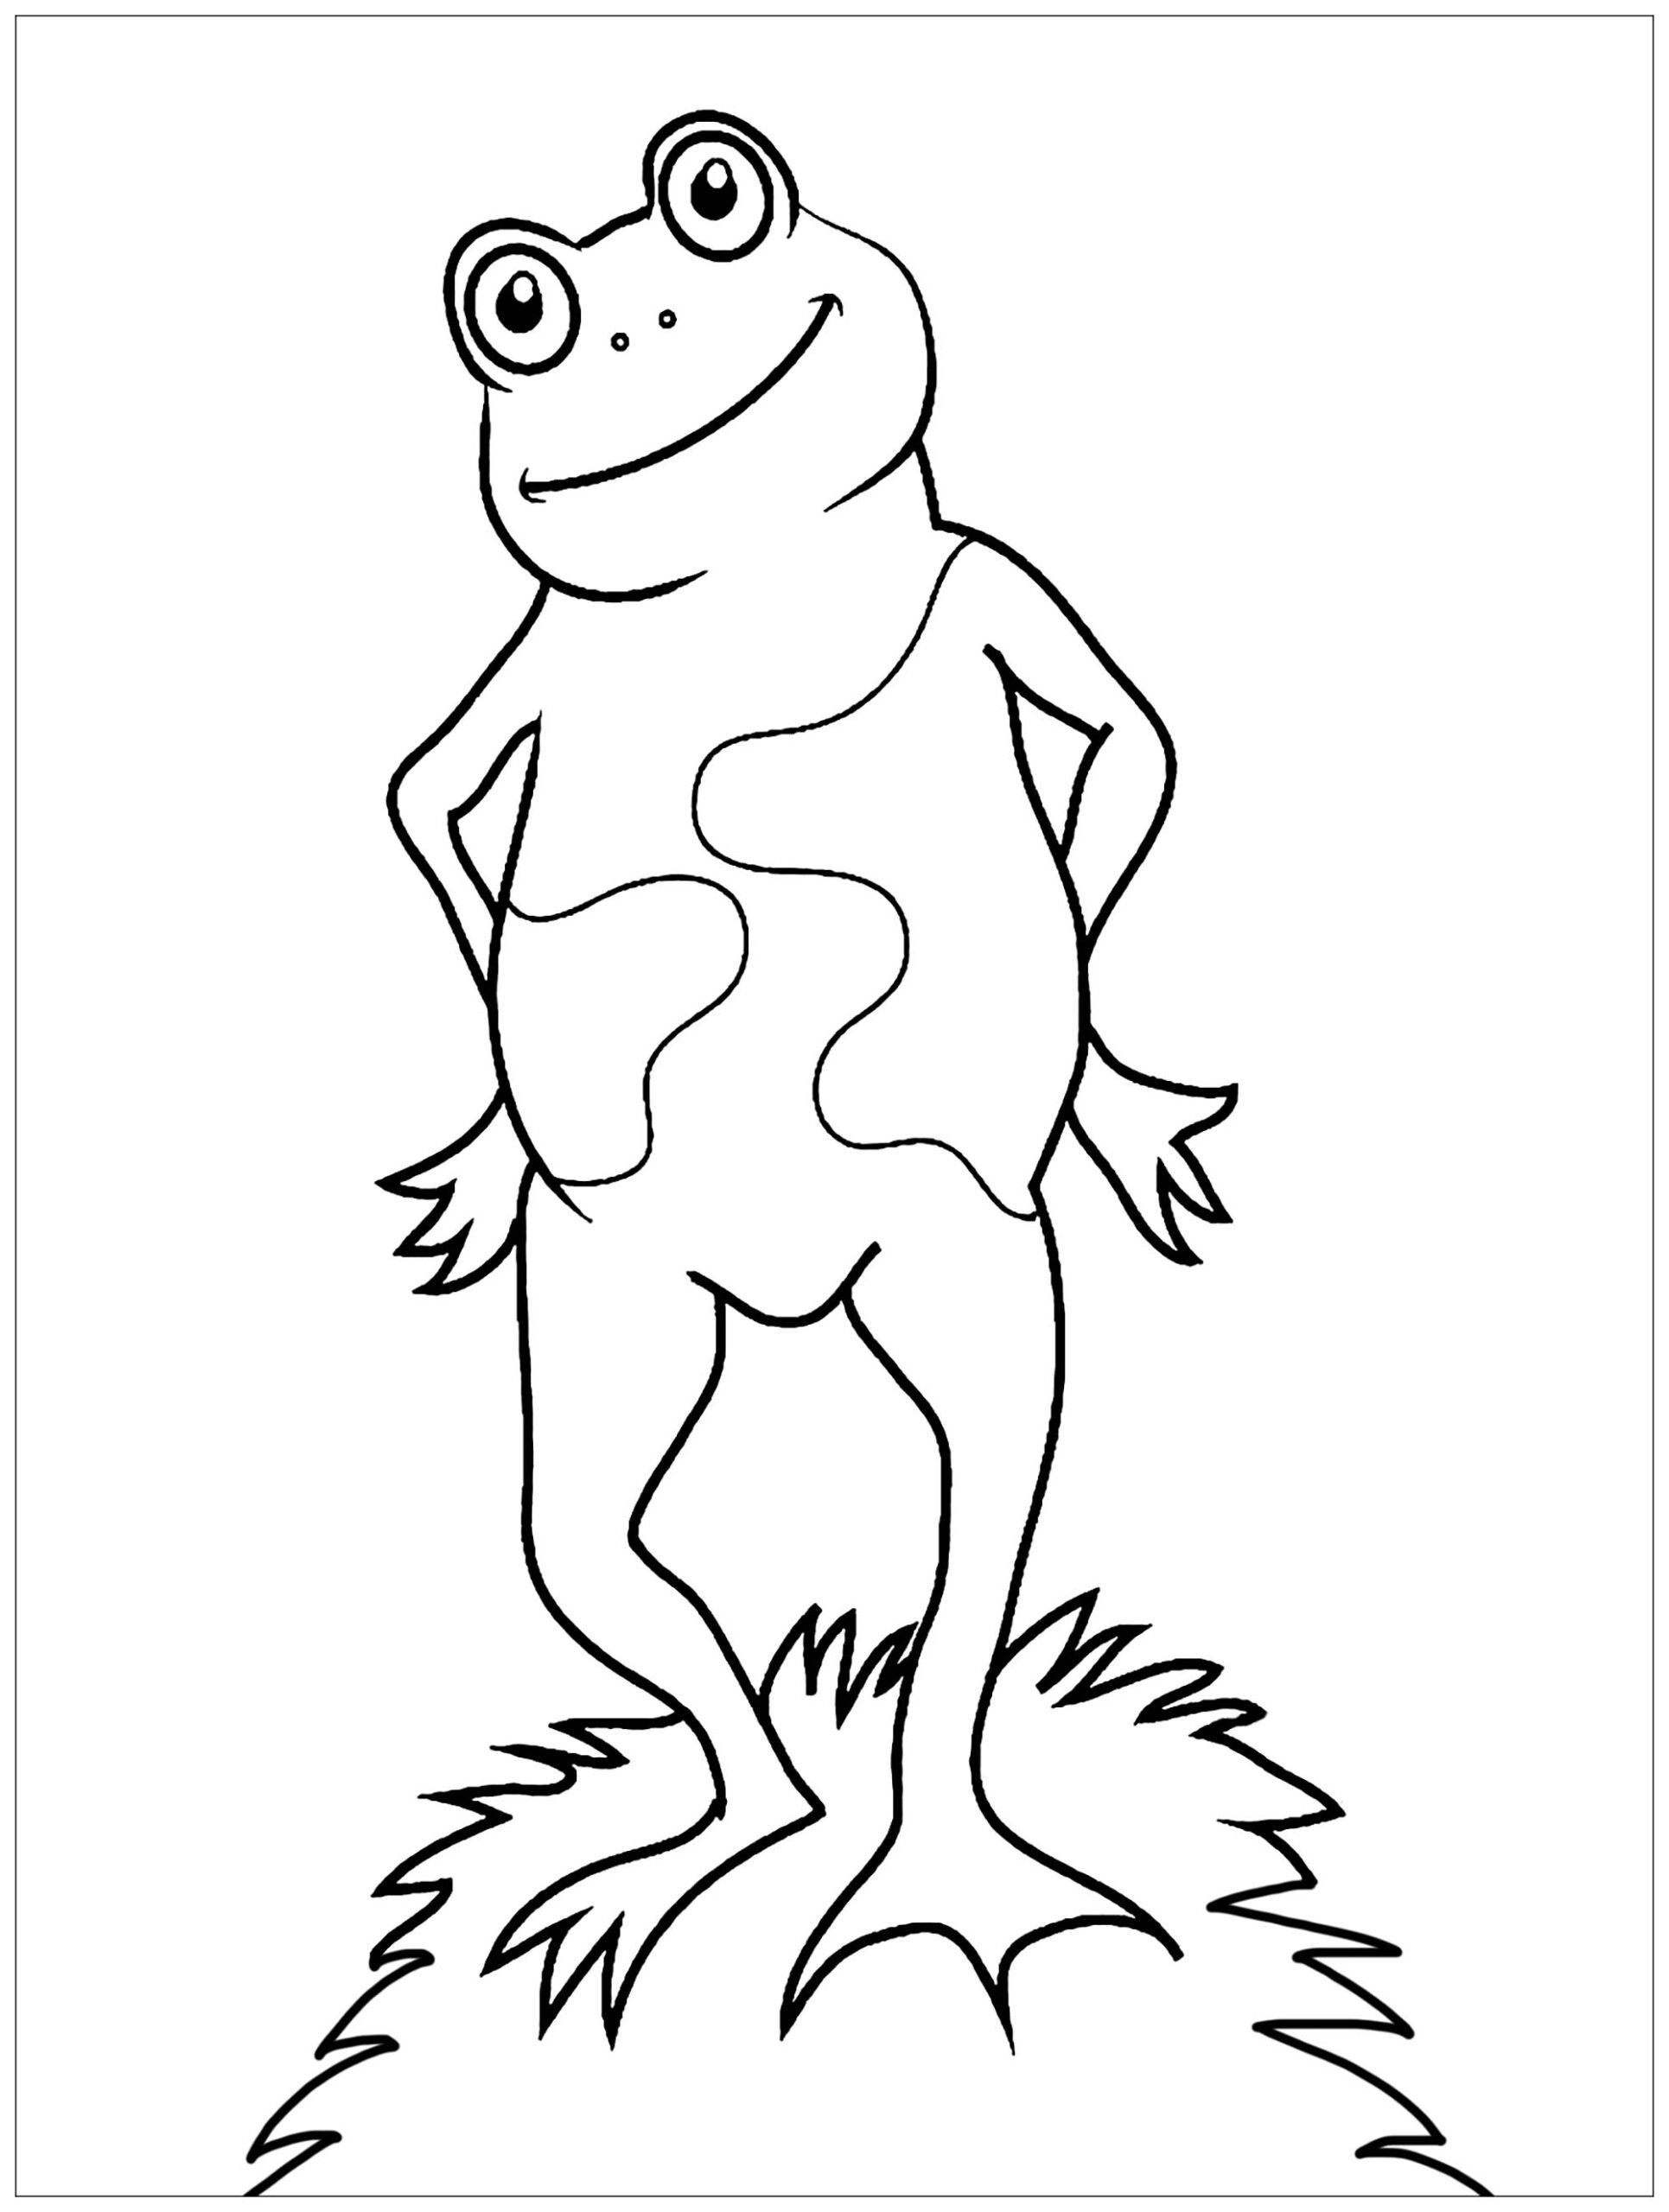 Funny Free Frogs coloring page to print and color